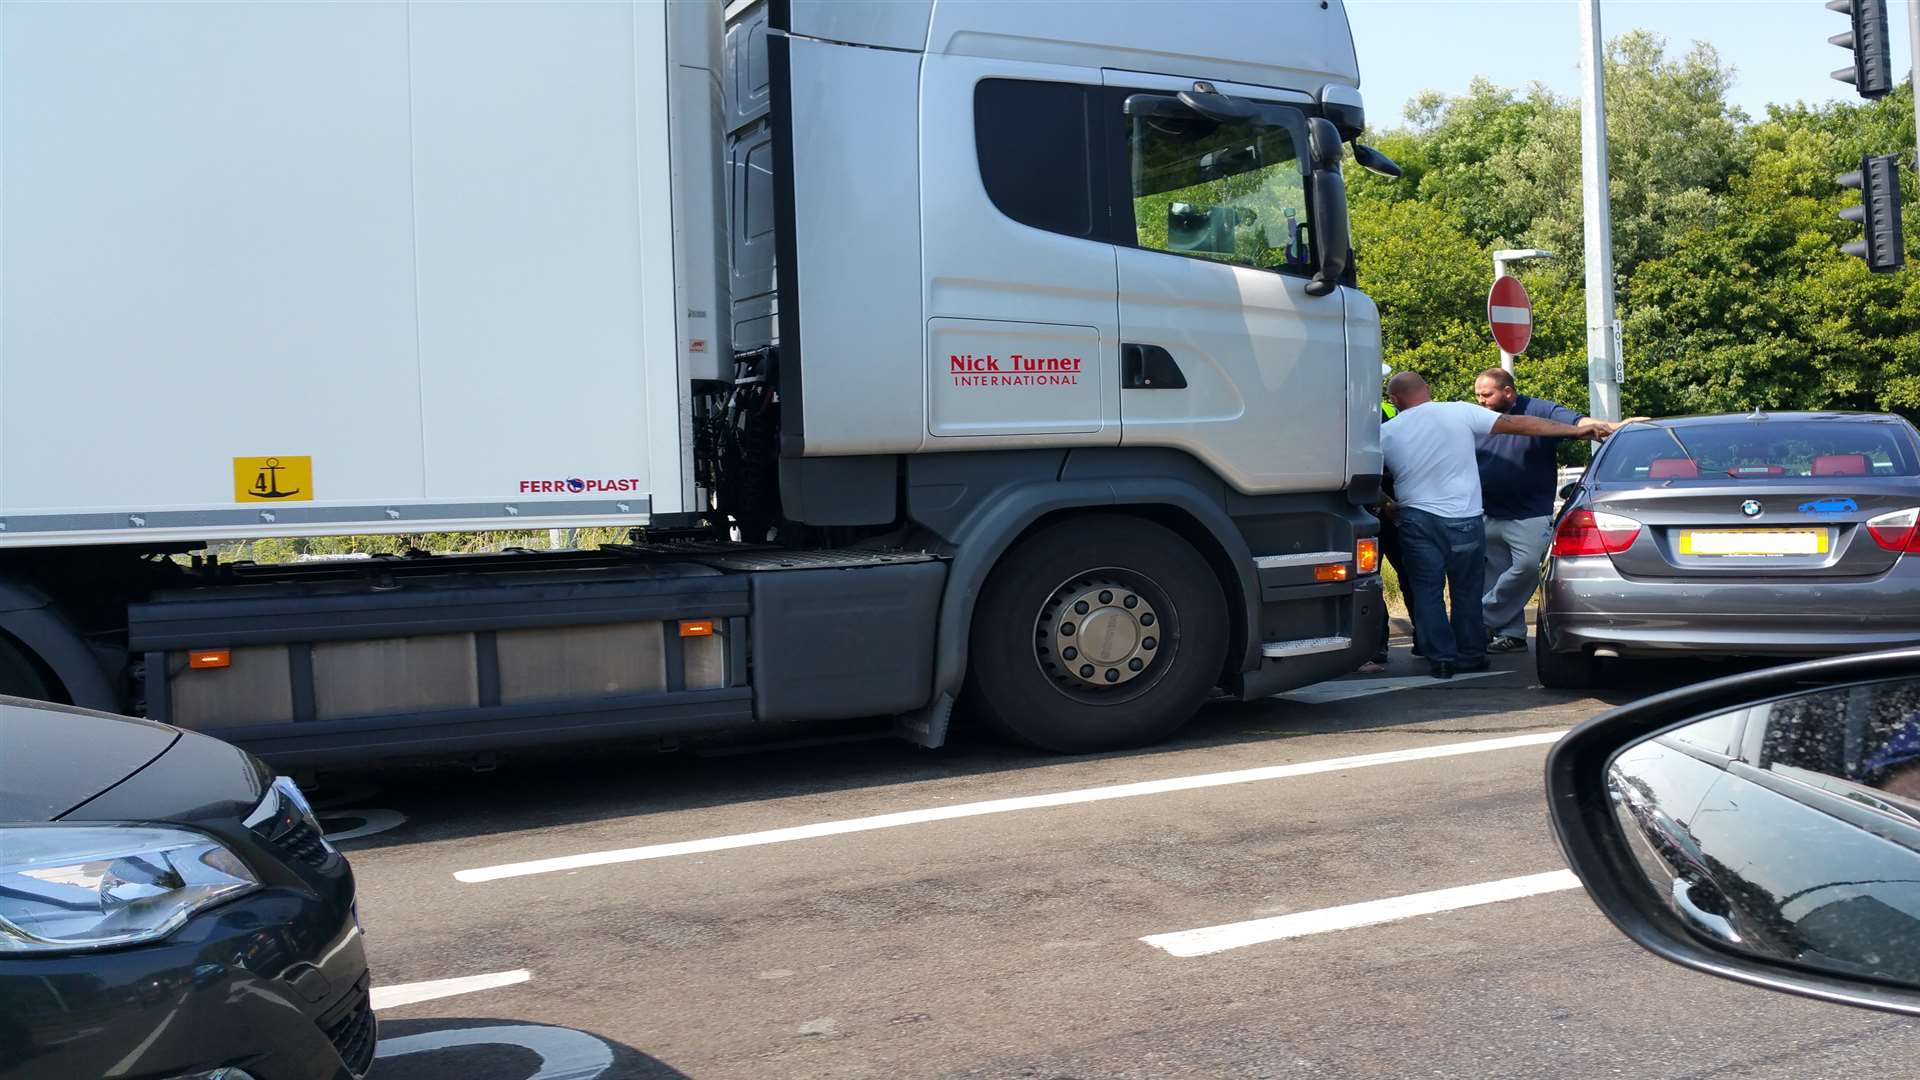 Details are exchanged in the crash involving a lorry and car